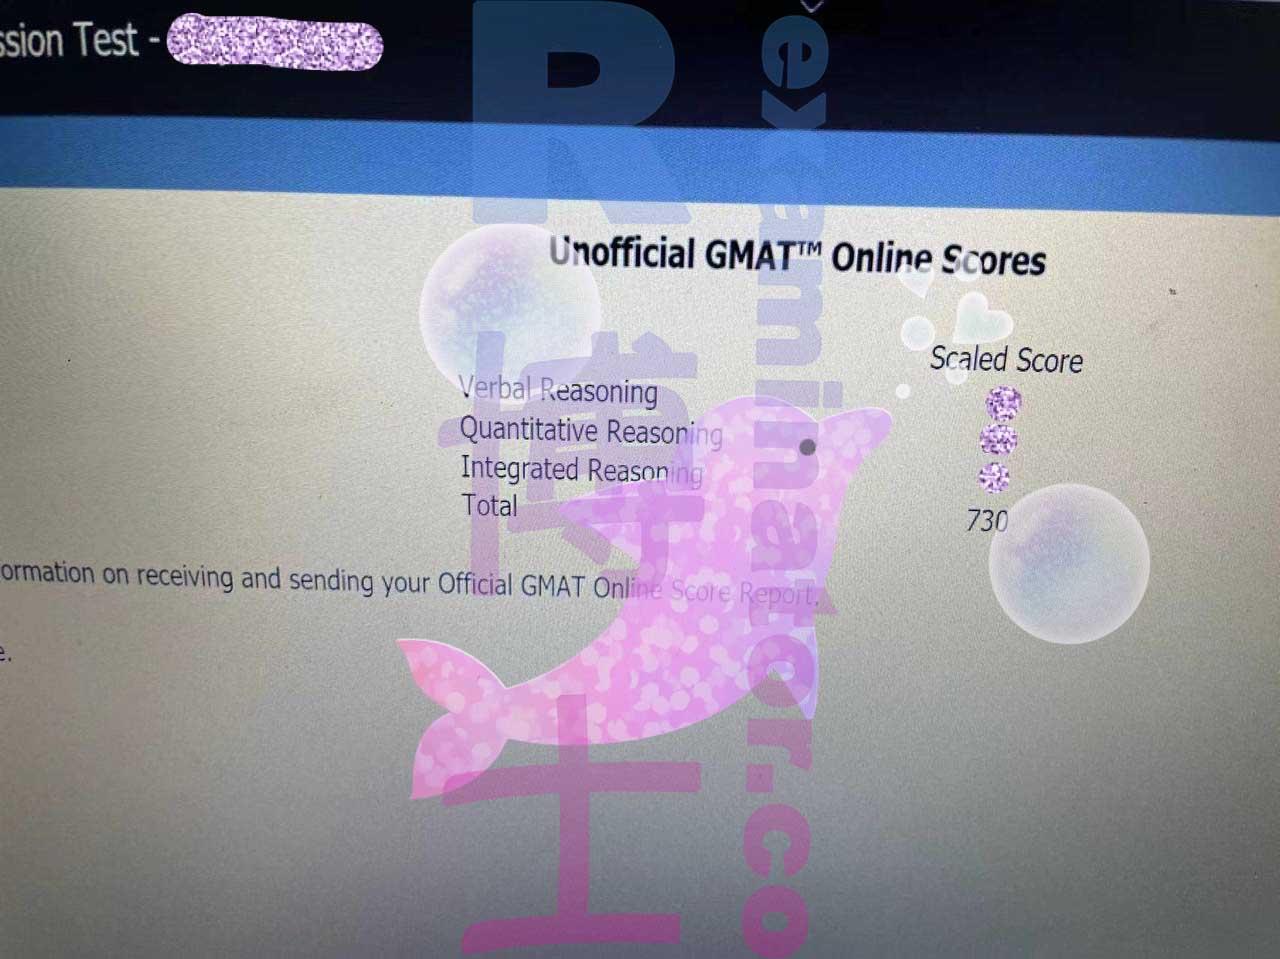 score image for GMAT Cheating success story #347